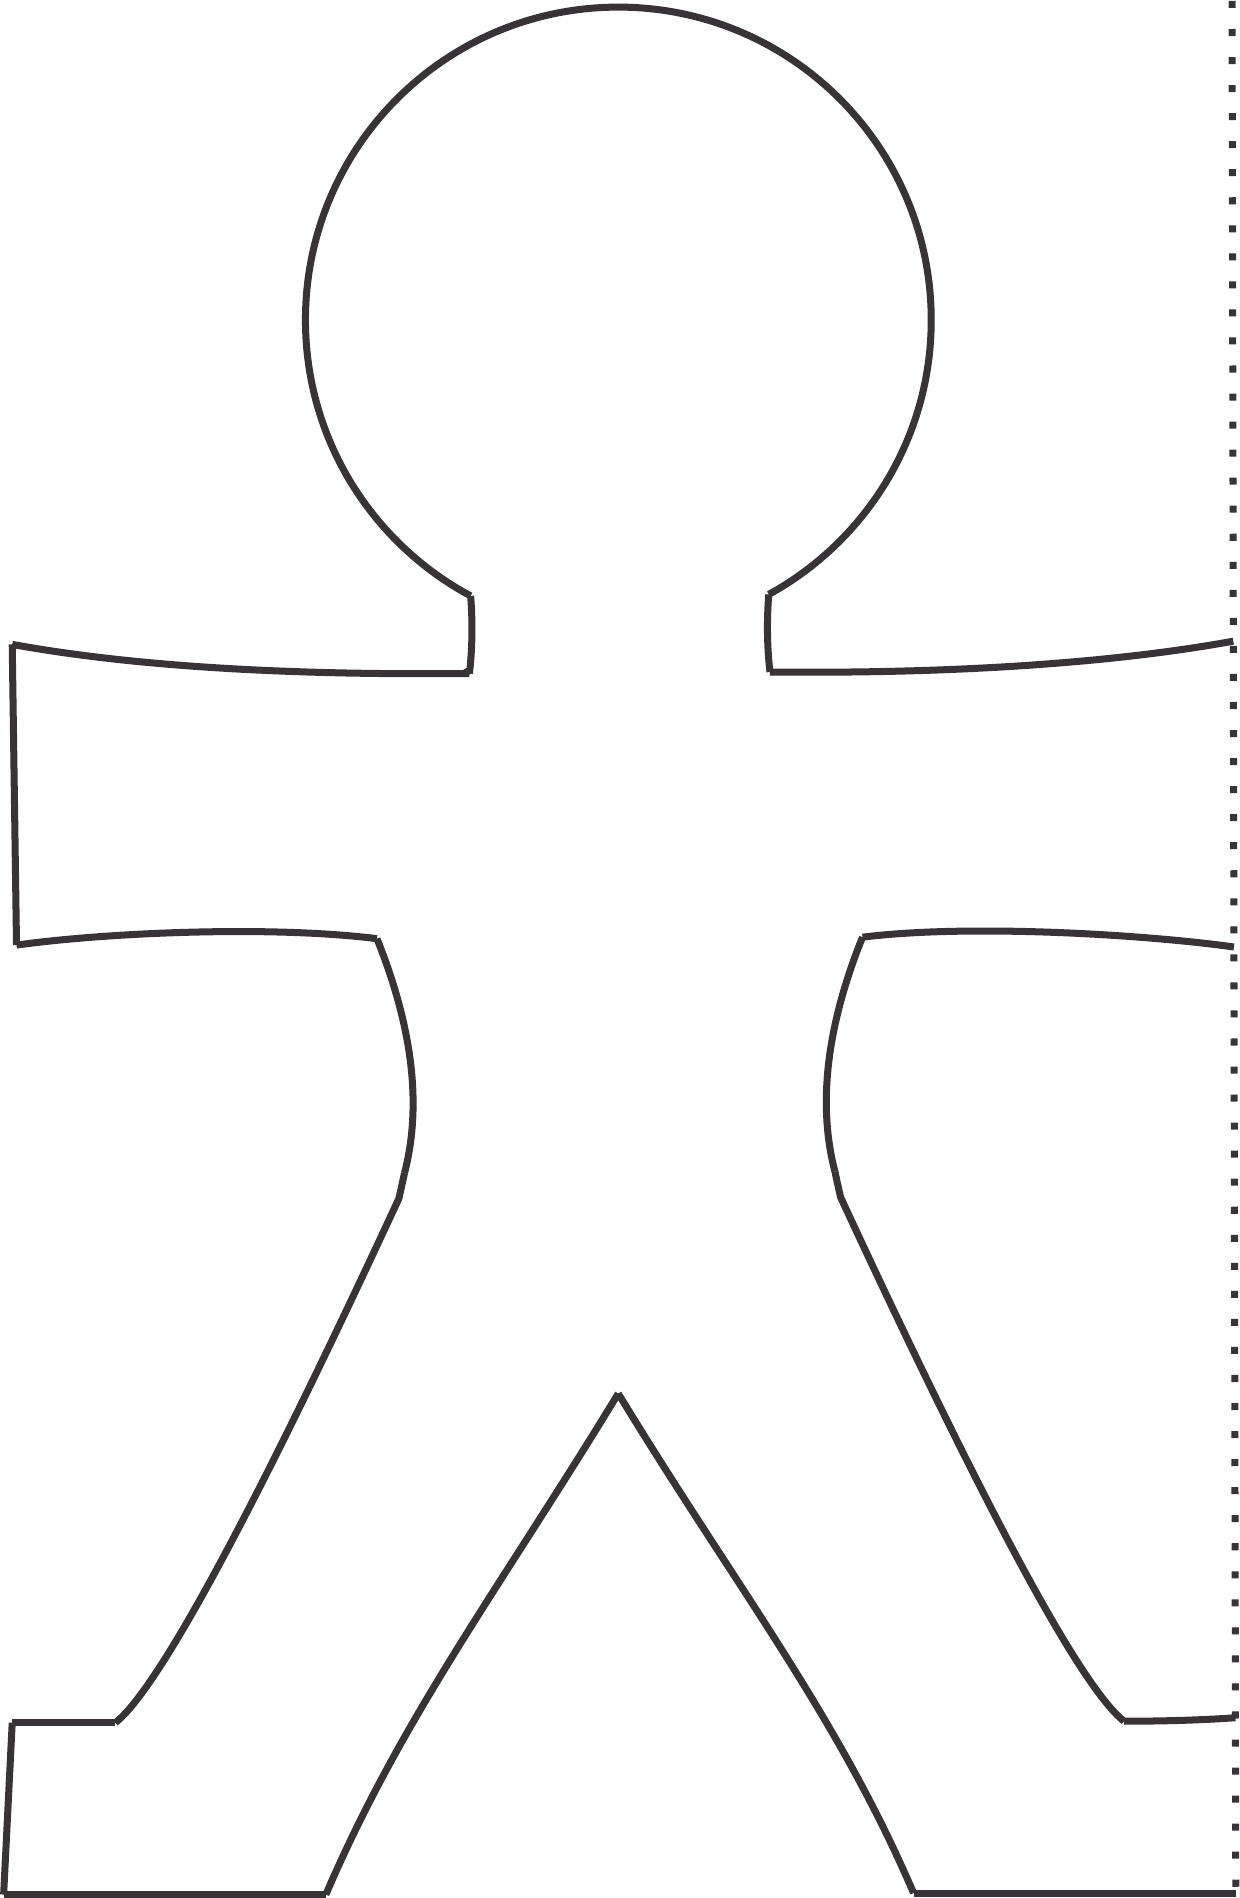 Sample Paper Doll Template Free Download